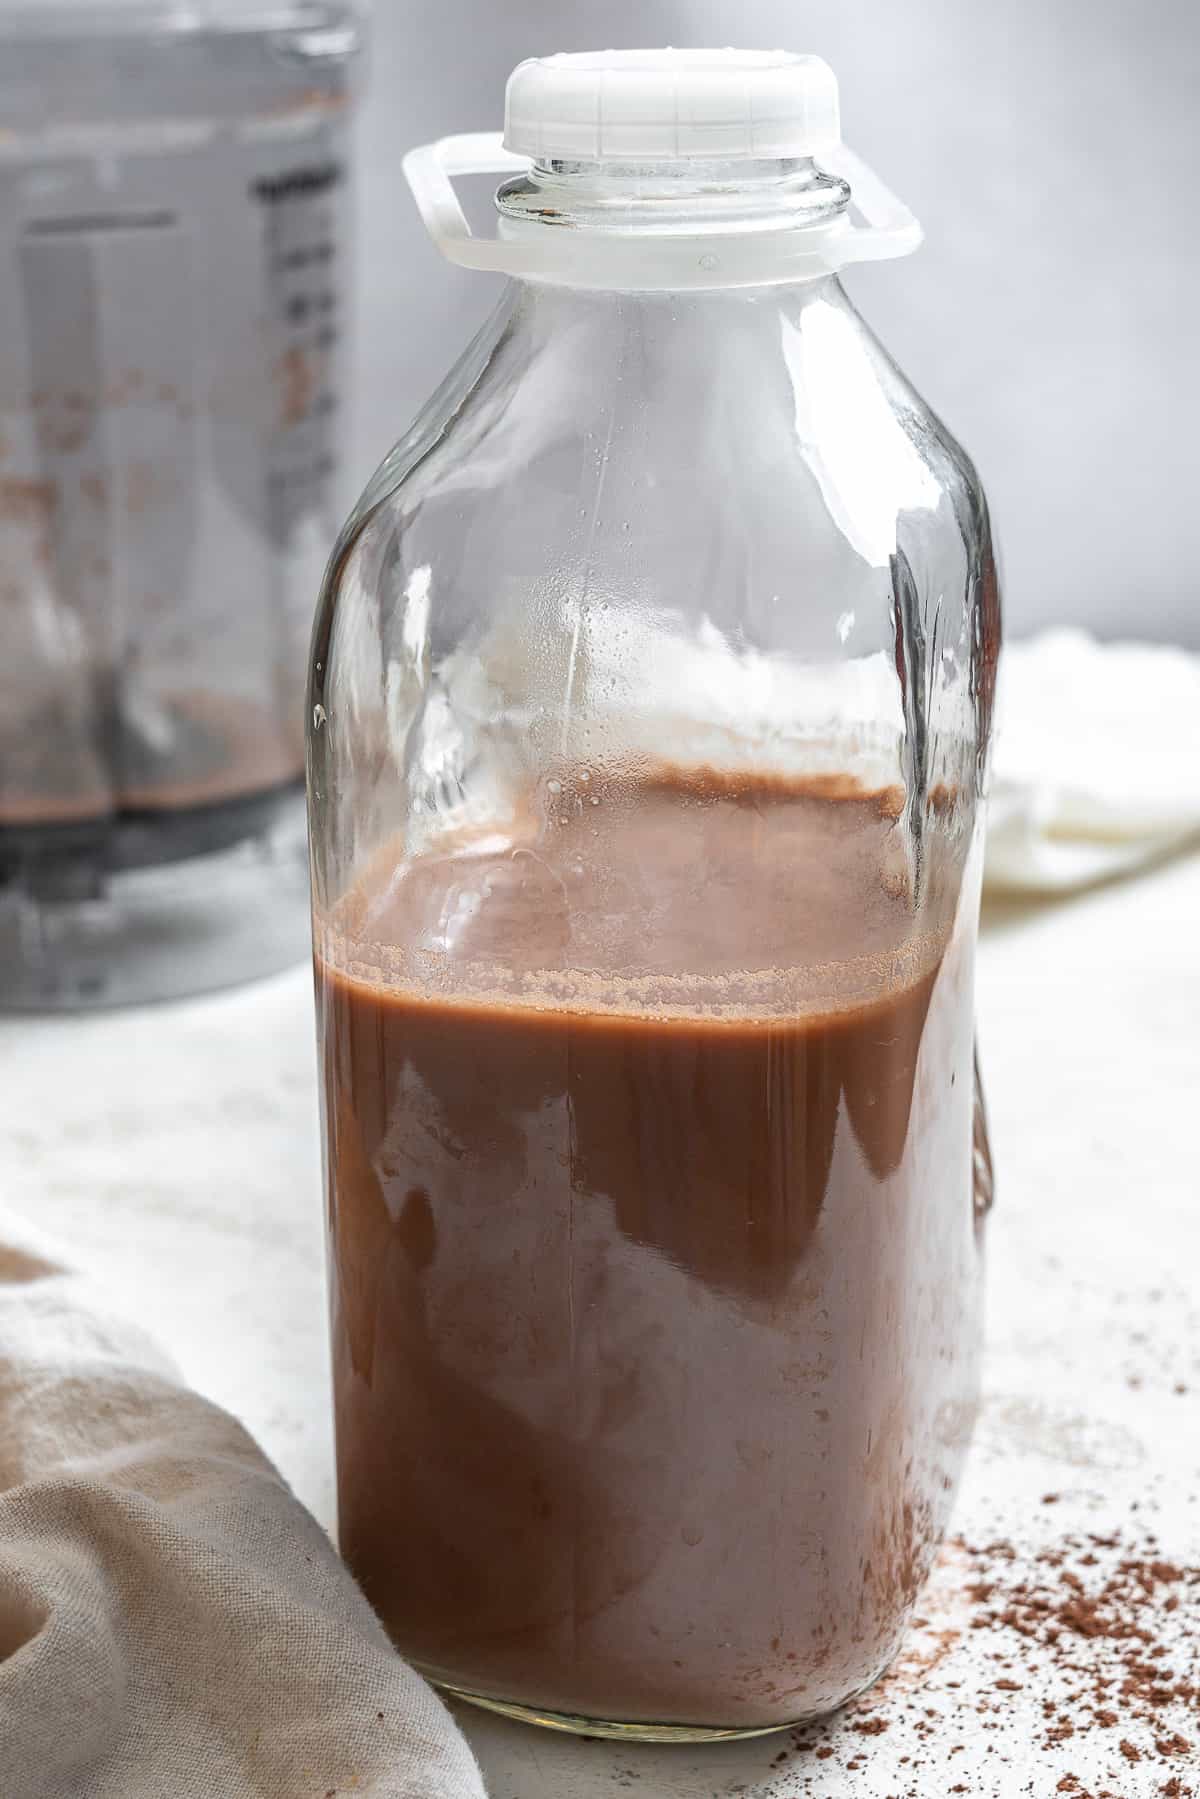 completed Chocolate Oat Milk in a glass jug